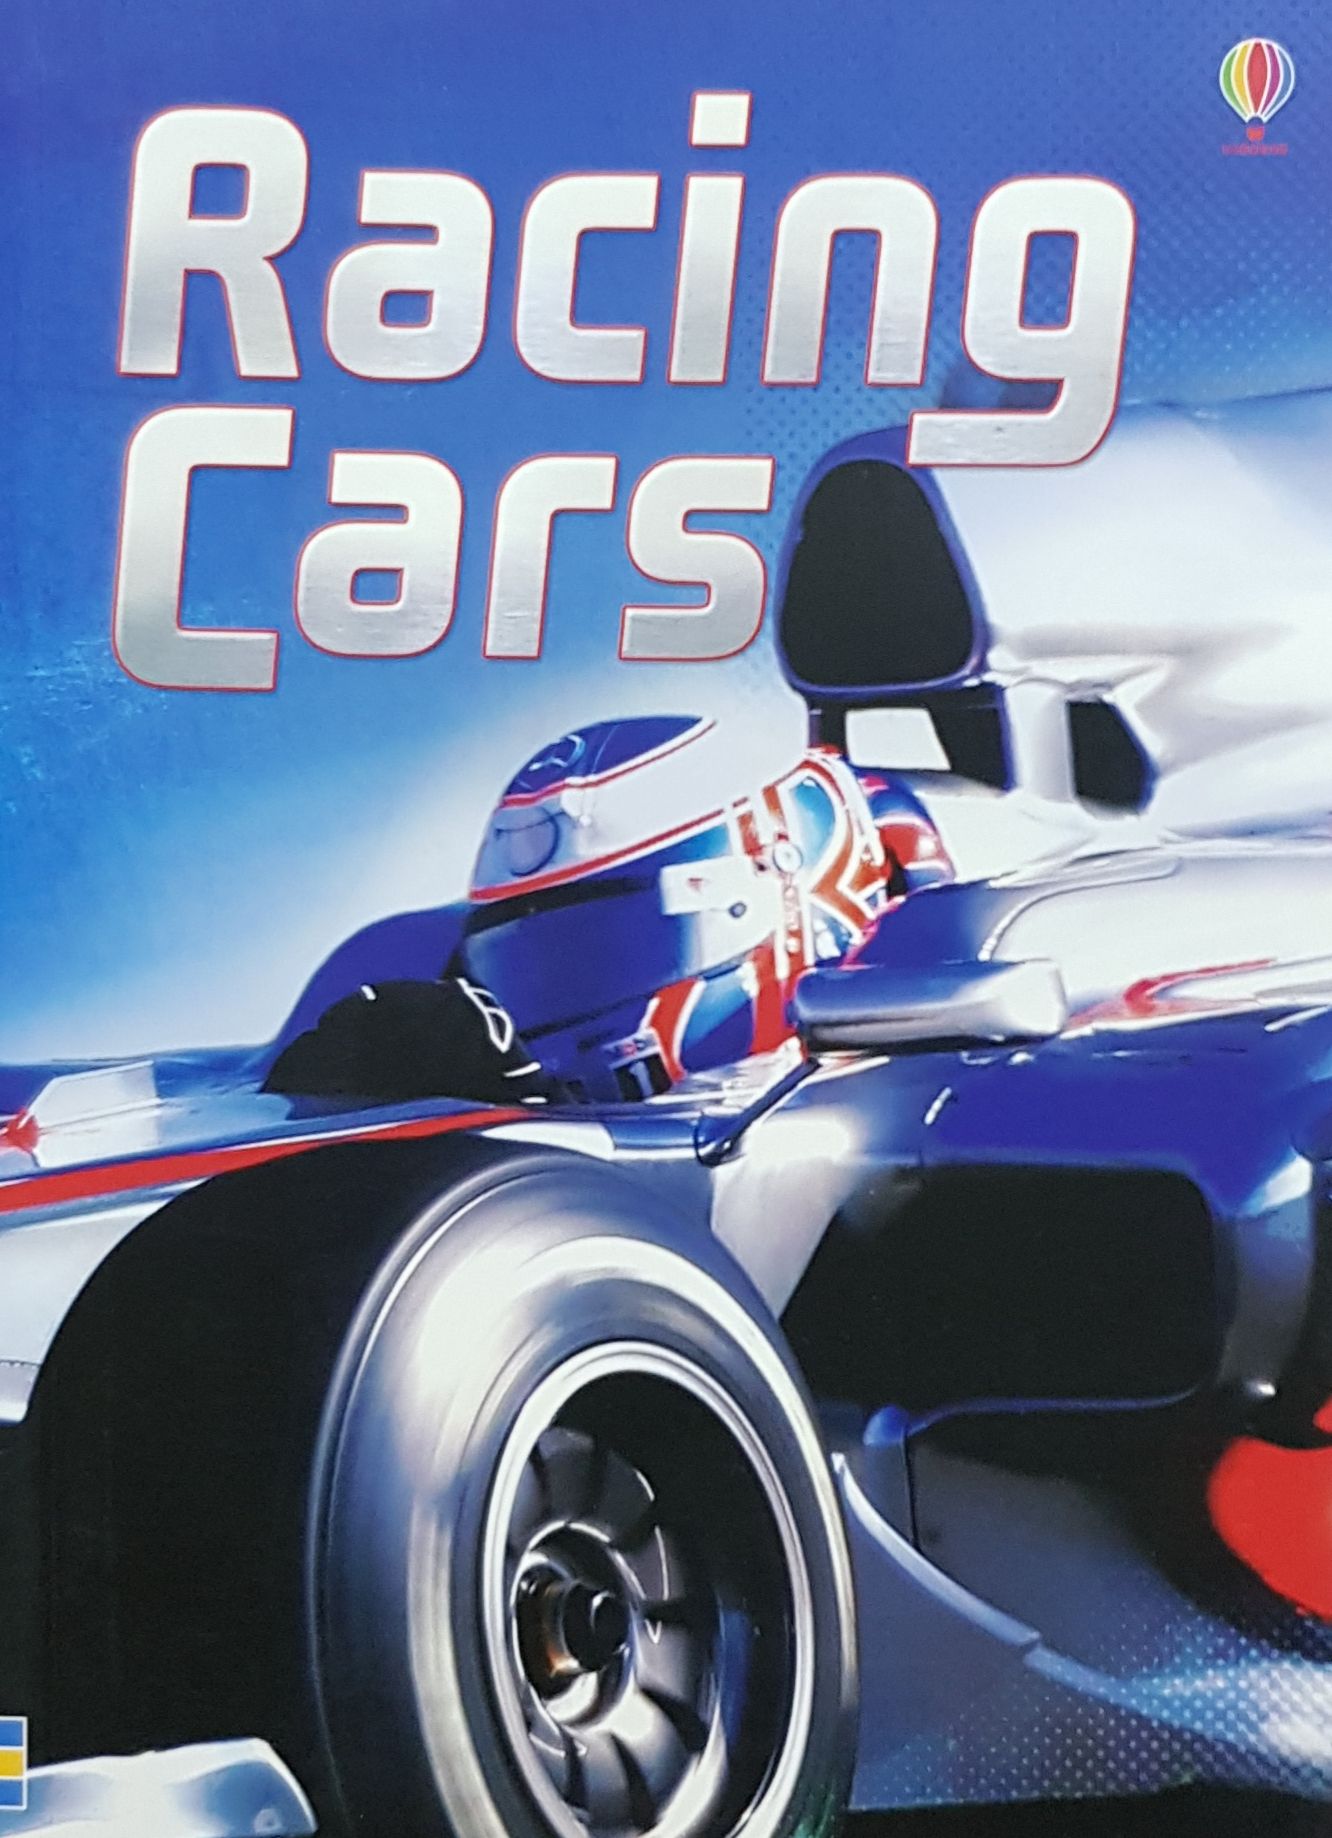 Racing cars Non-fiction by Usborne